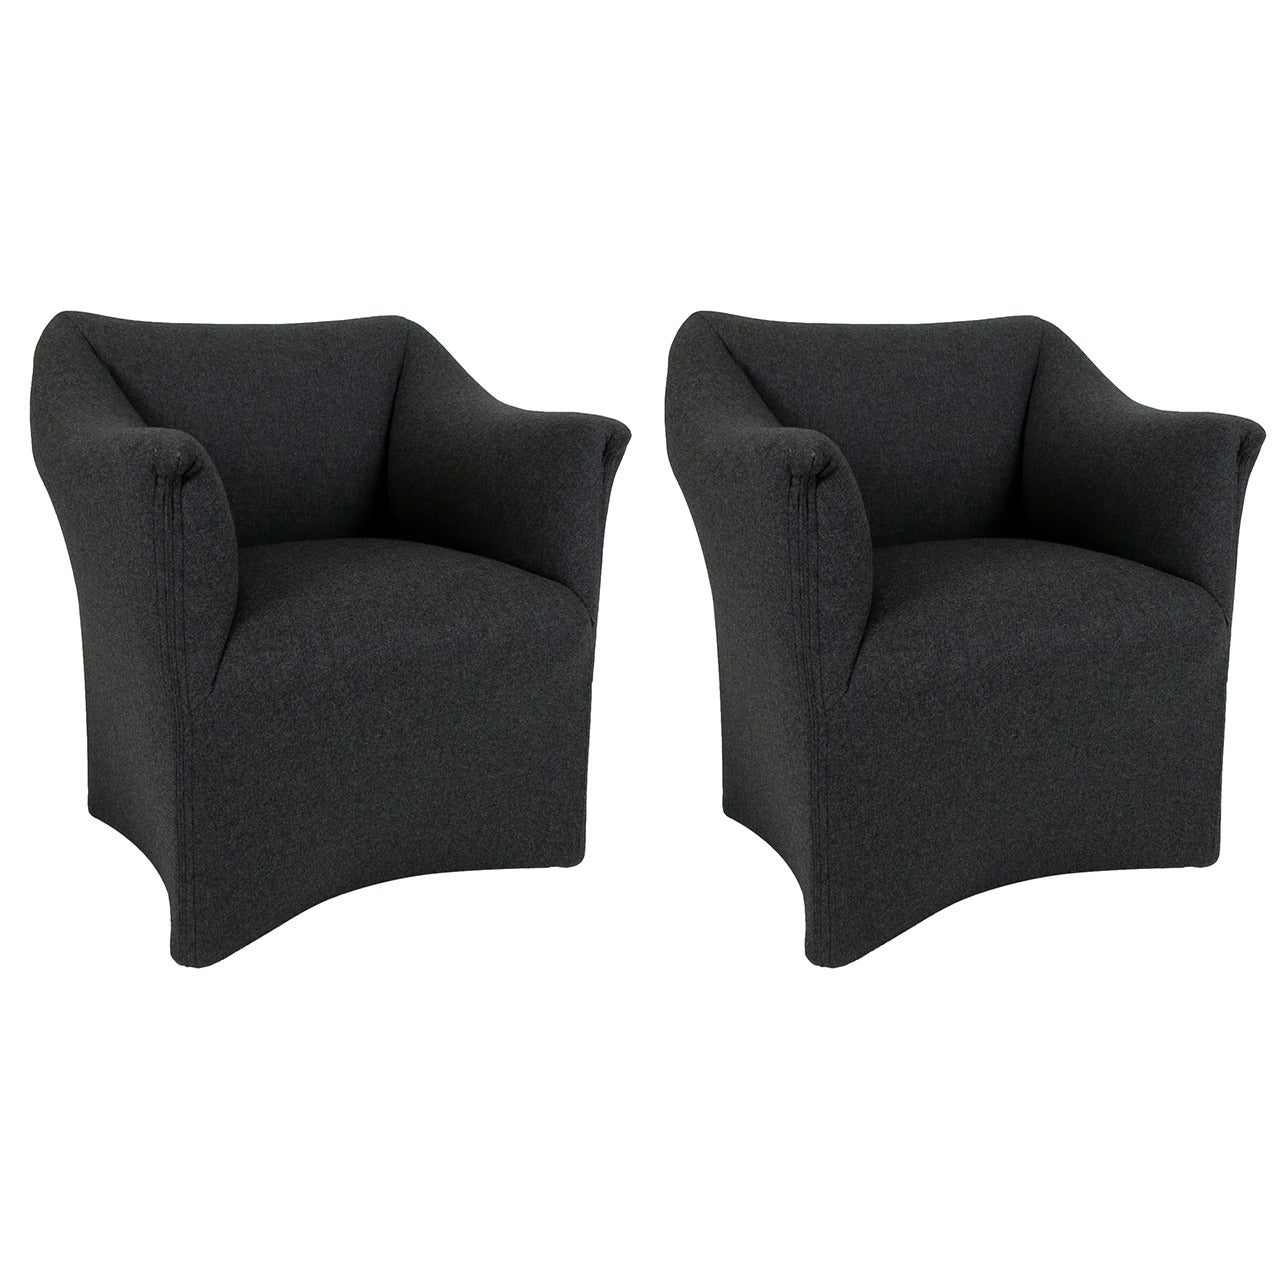 Pair of Model 684 "Tentazione" Chairs by Mario Bellini for Cassina